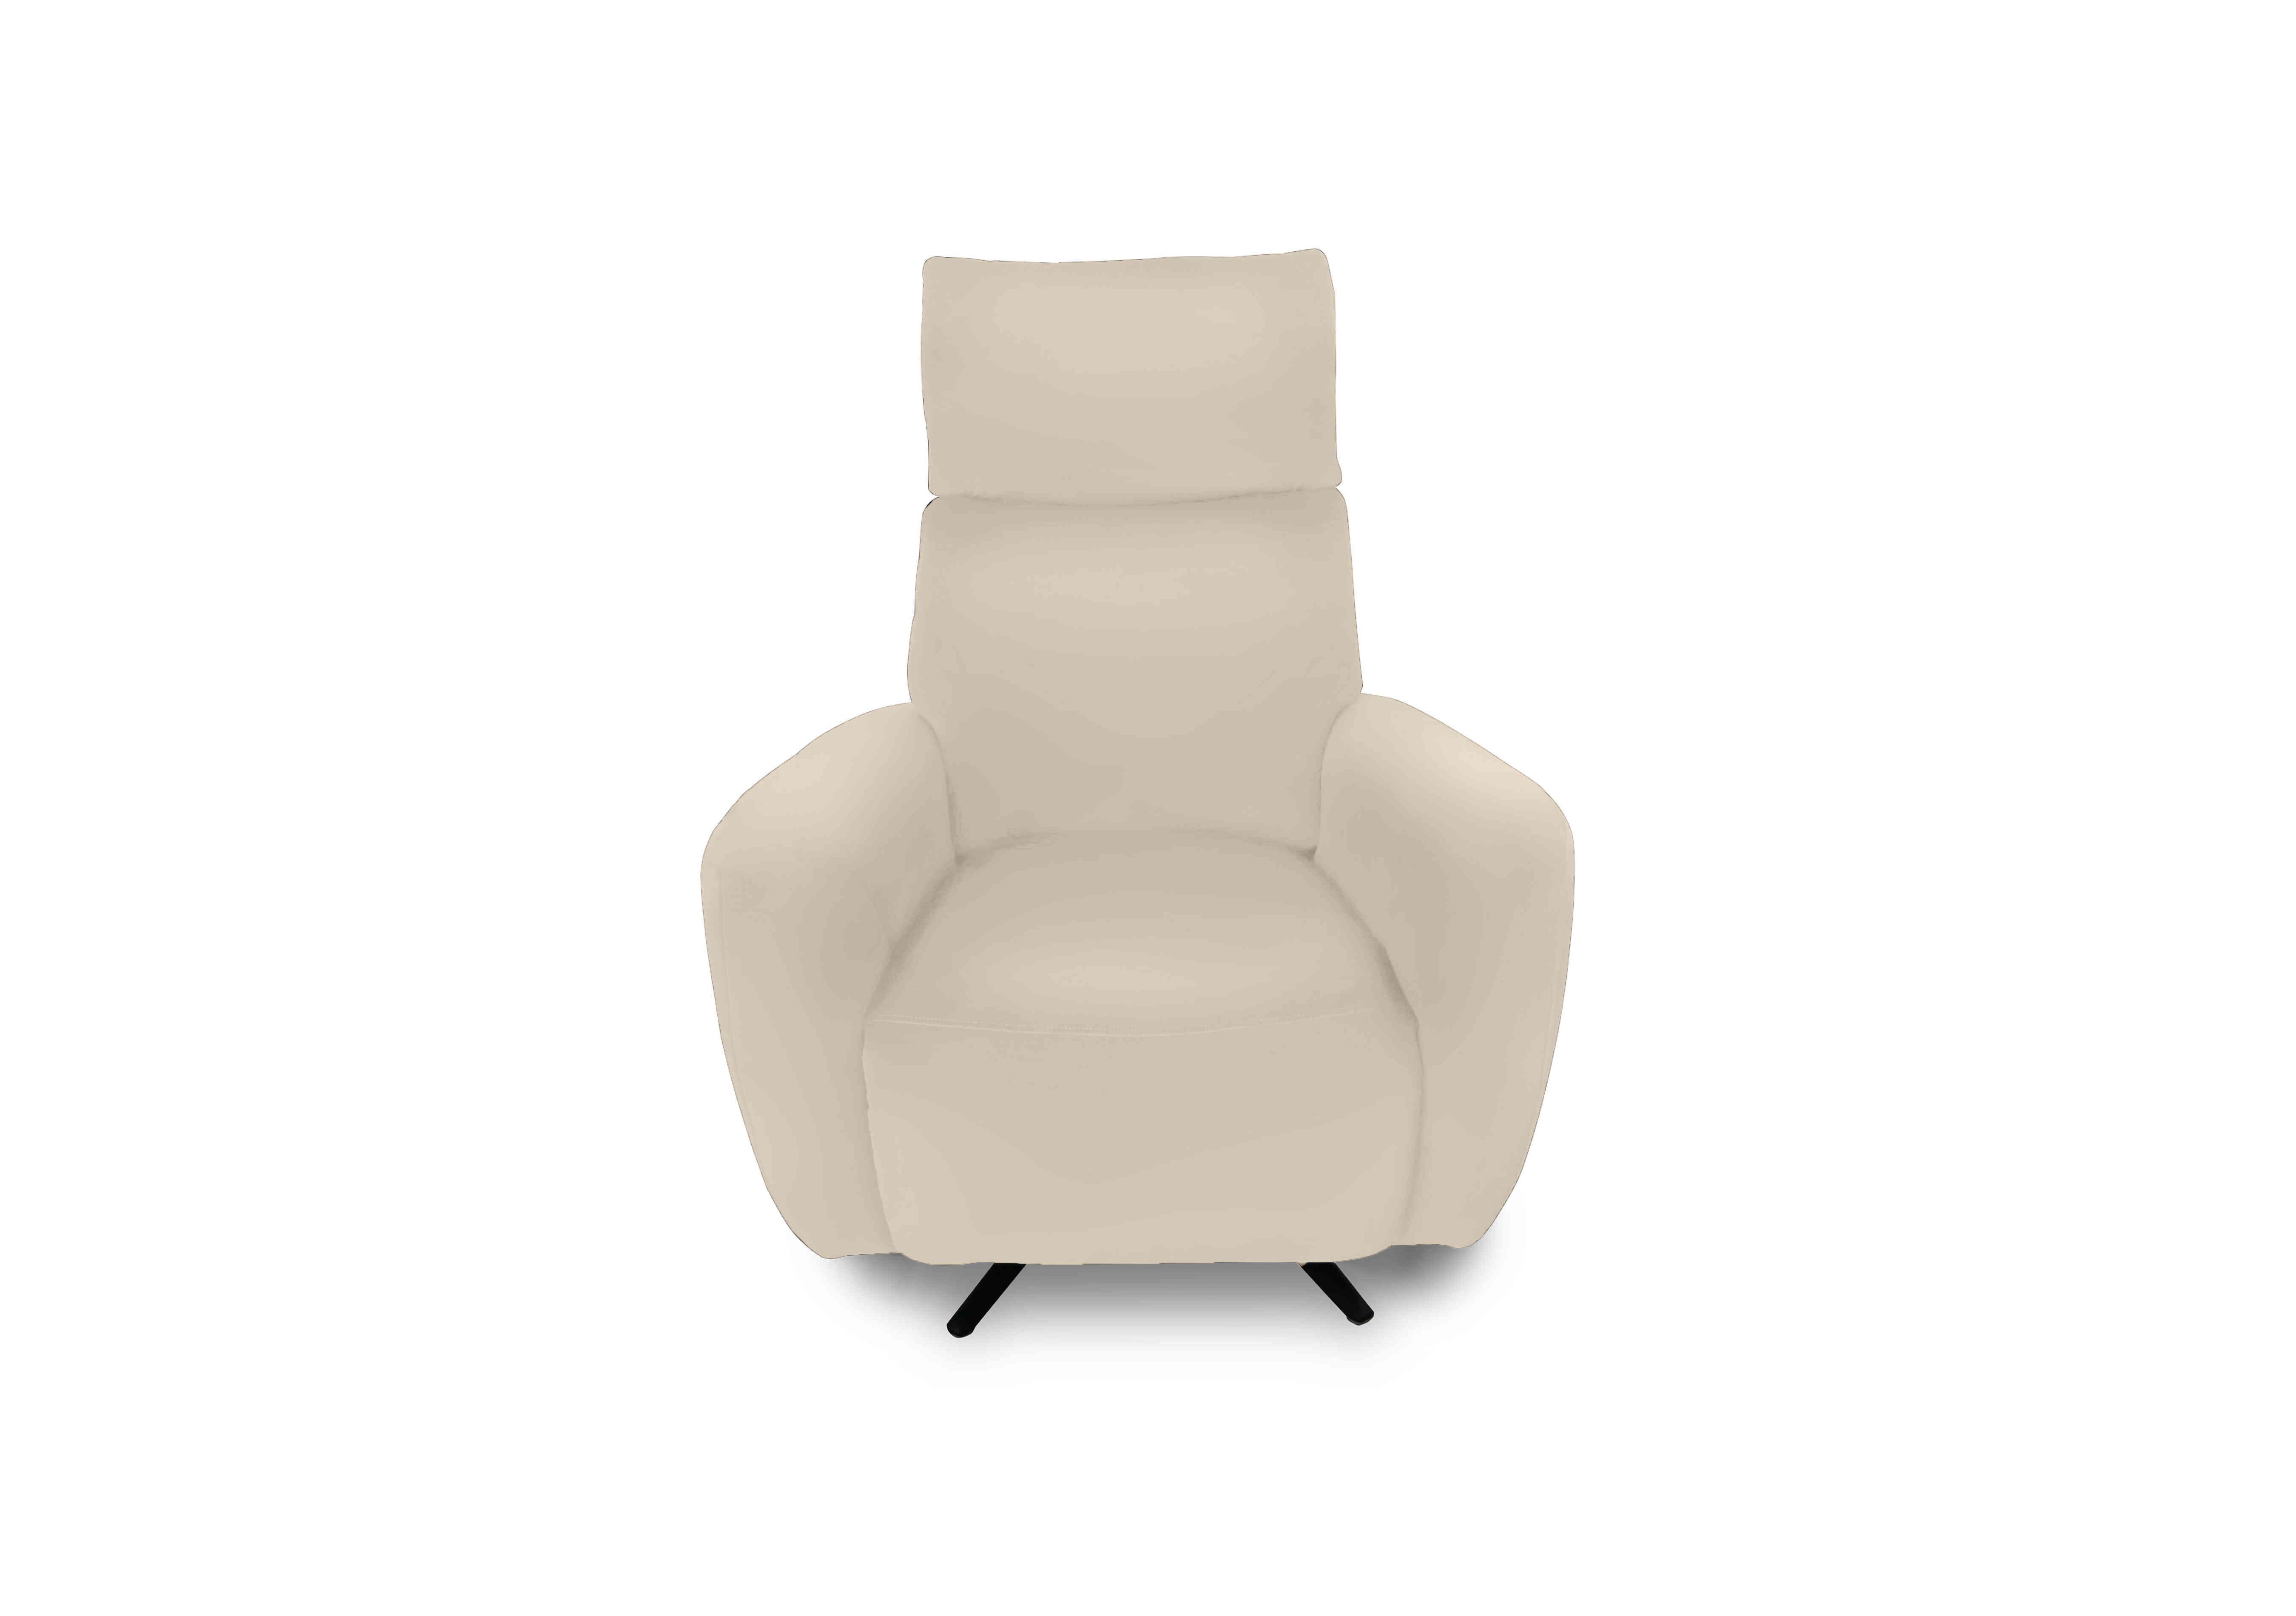 Designer Chair Collection Granada Leather Power Recliner Swivel Chair with Massage Feature in Bv-862c Bisque on Furniture Village